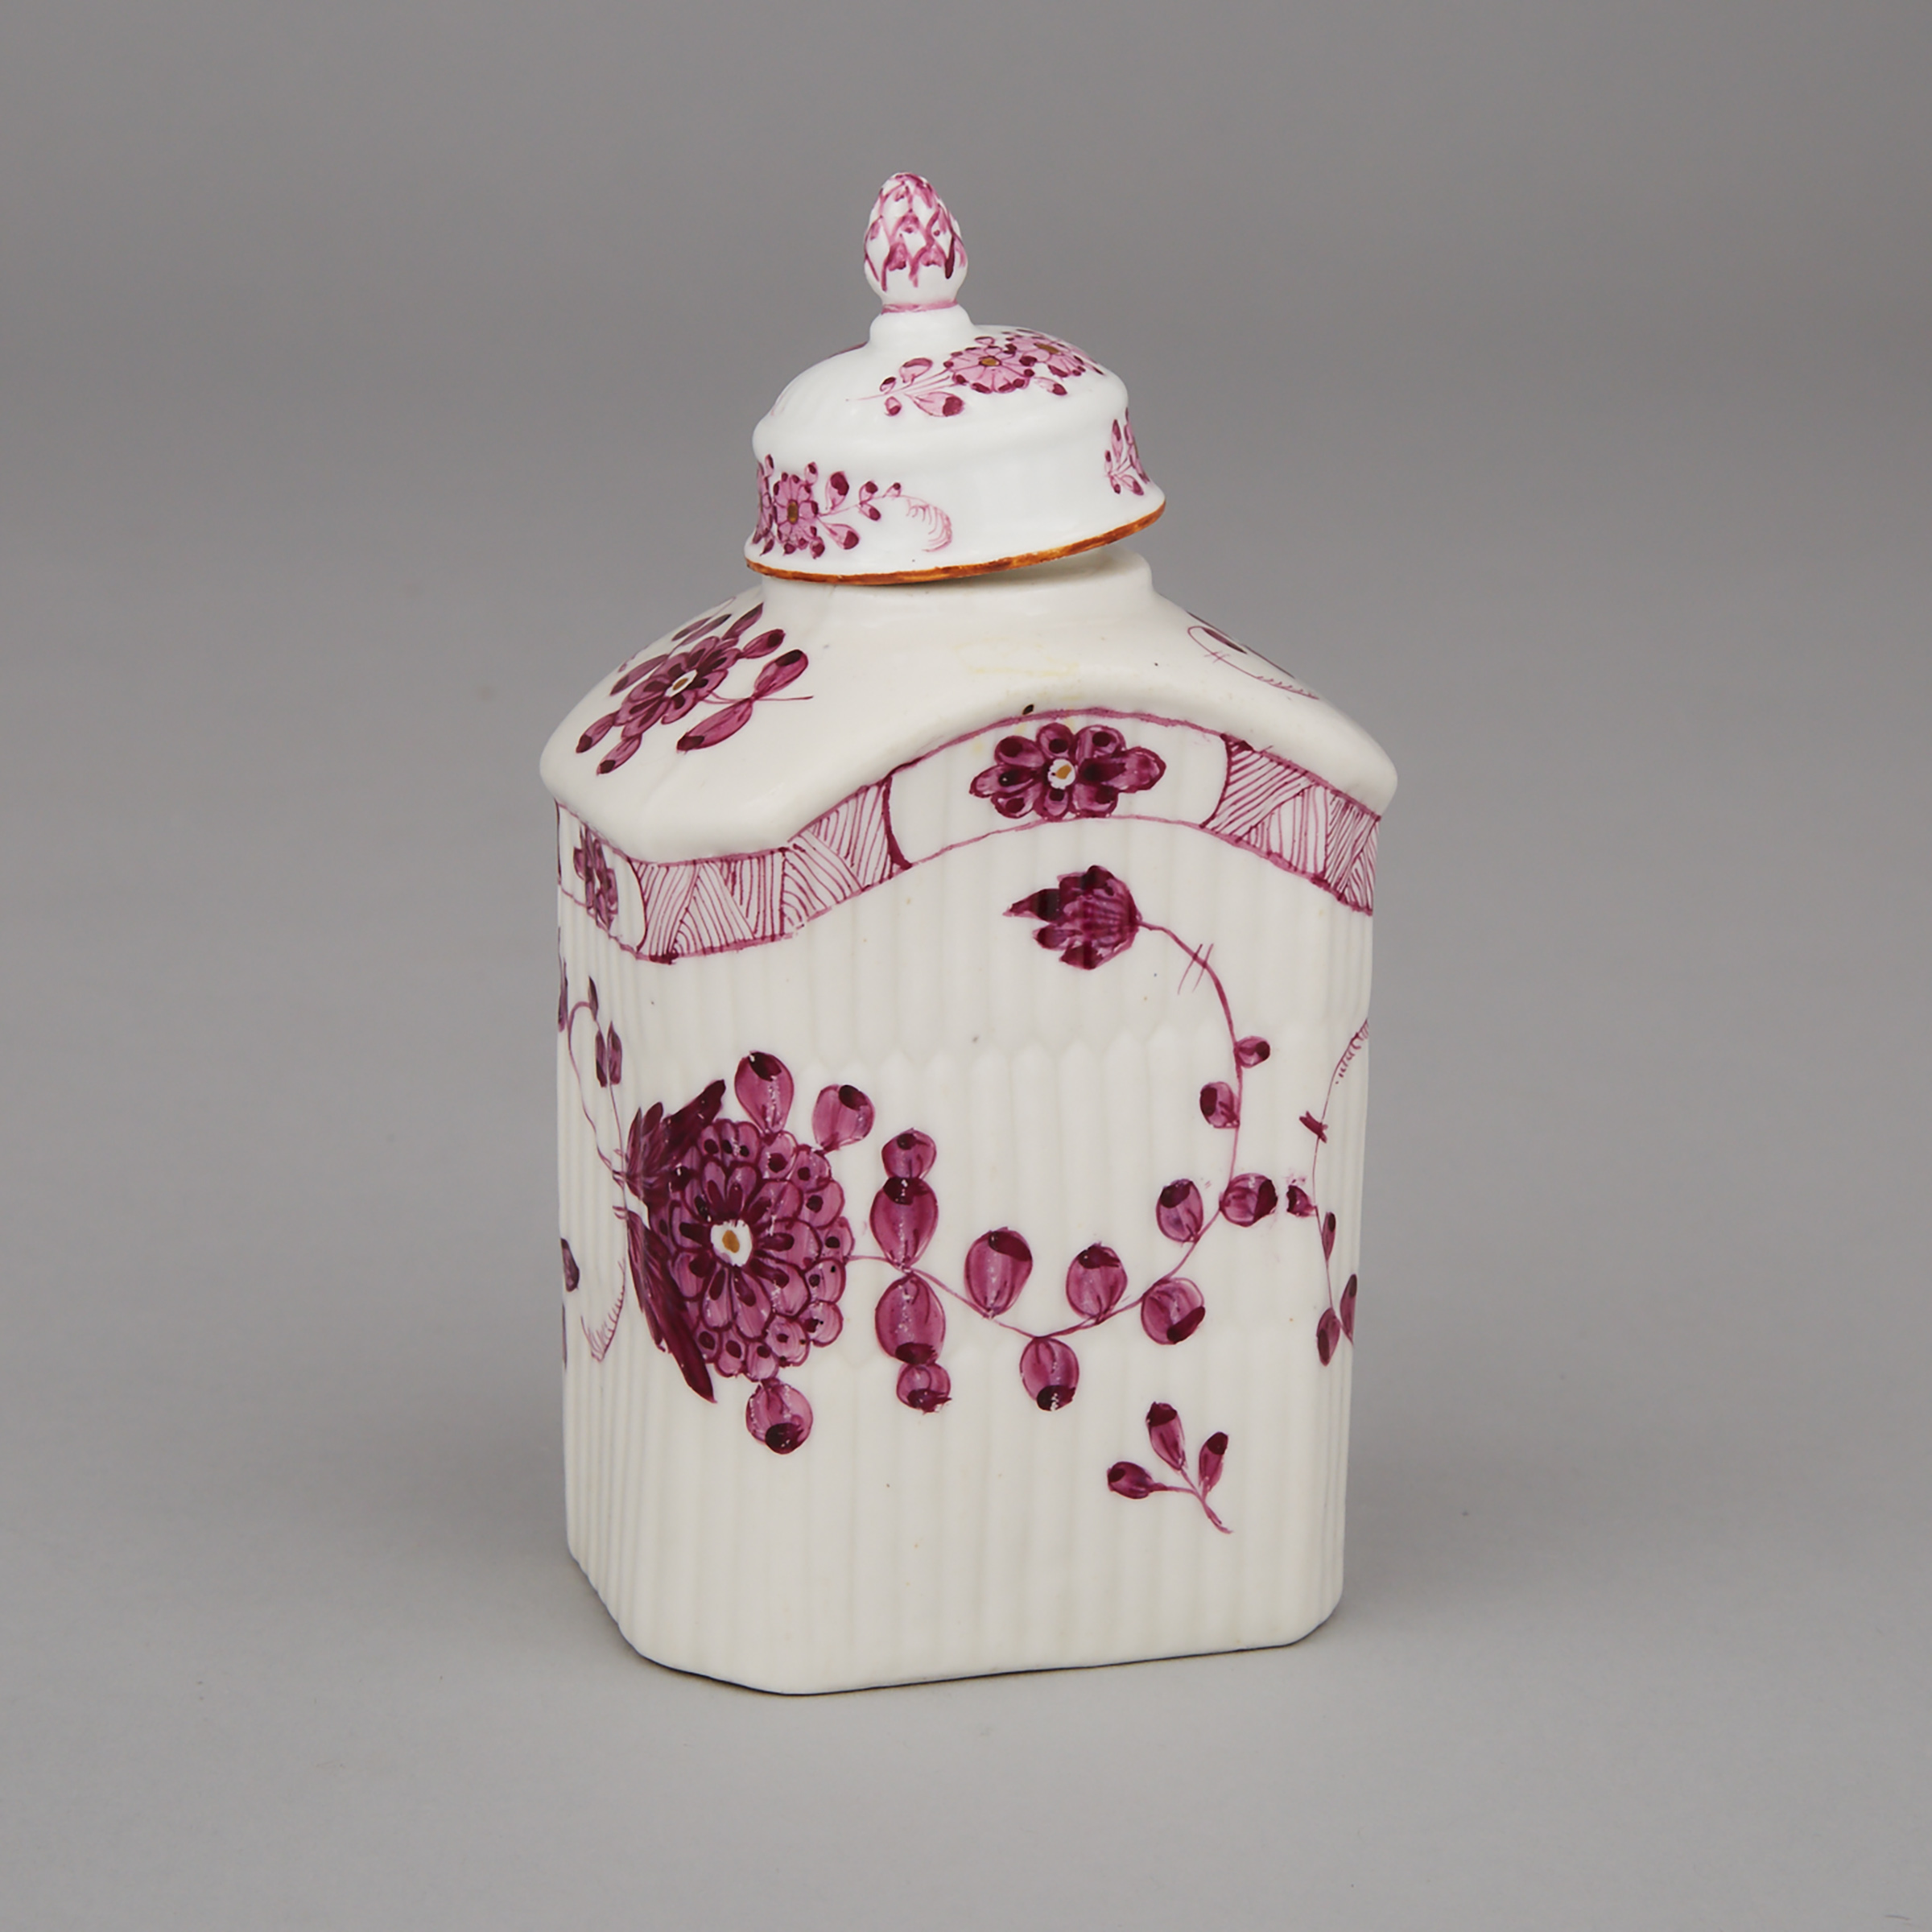 German Porcelain Tea Canister, late 18th century